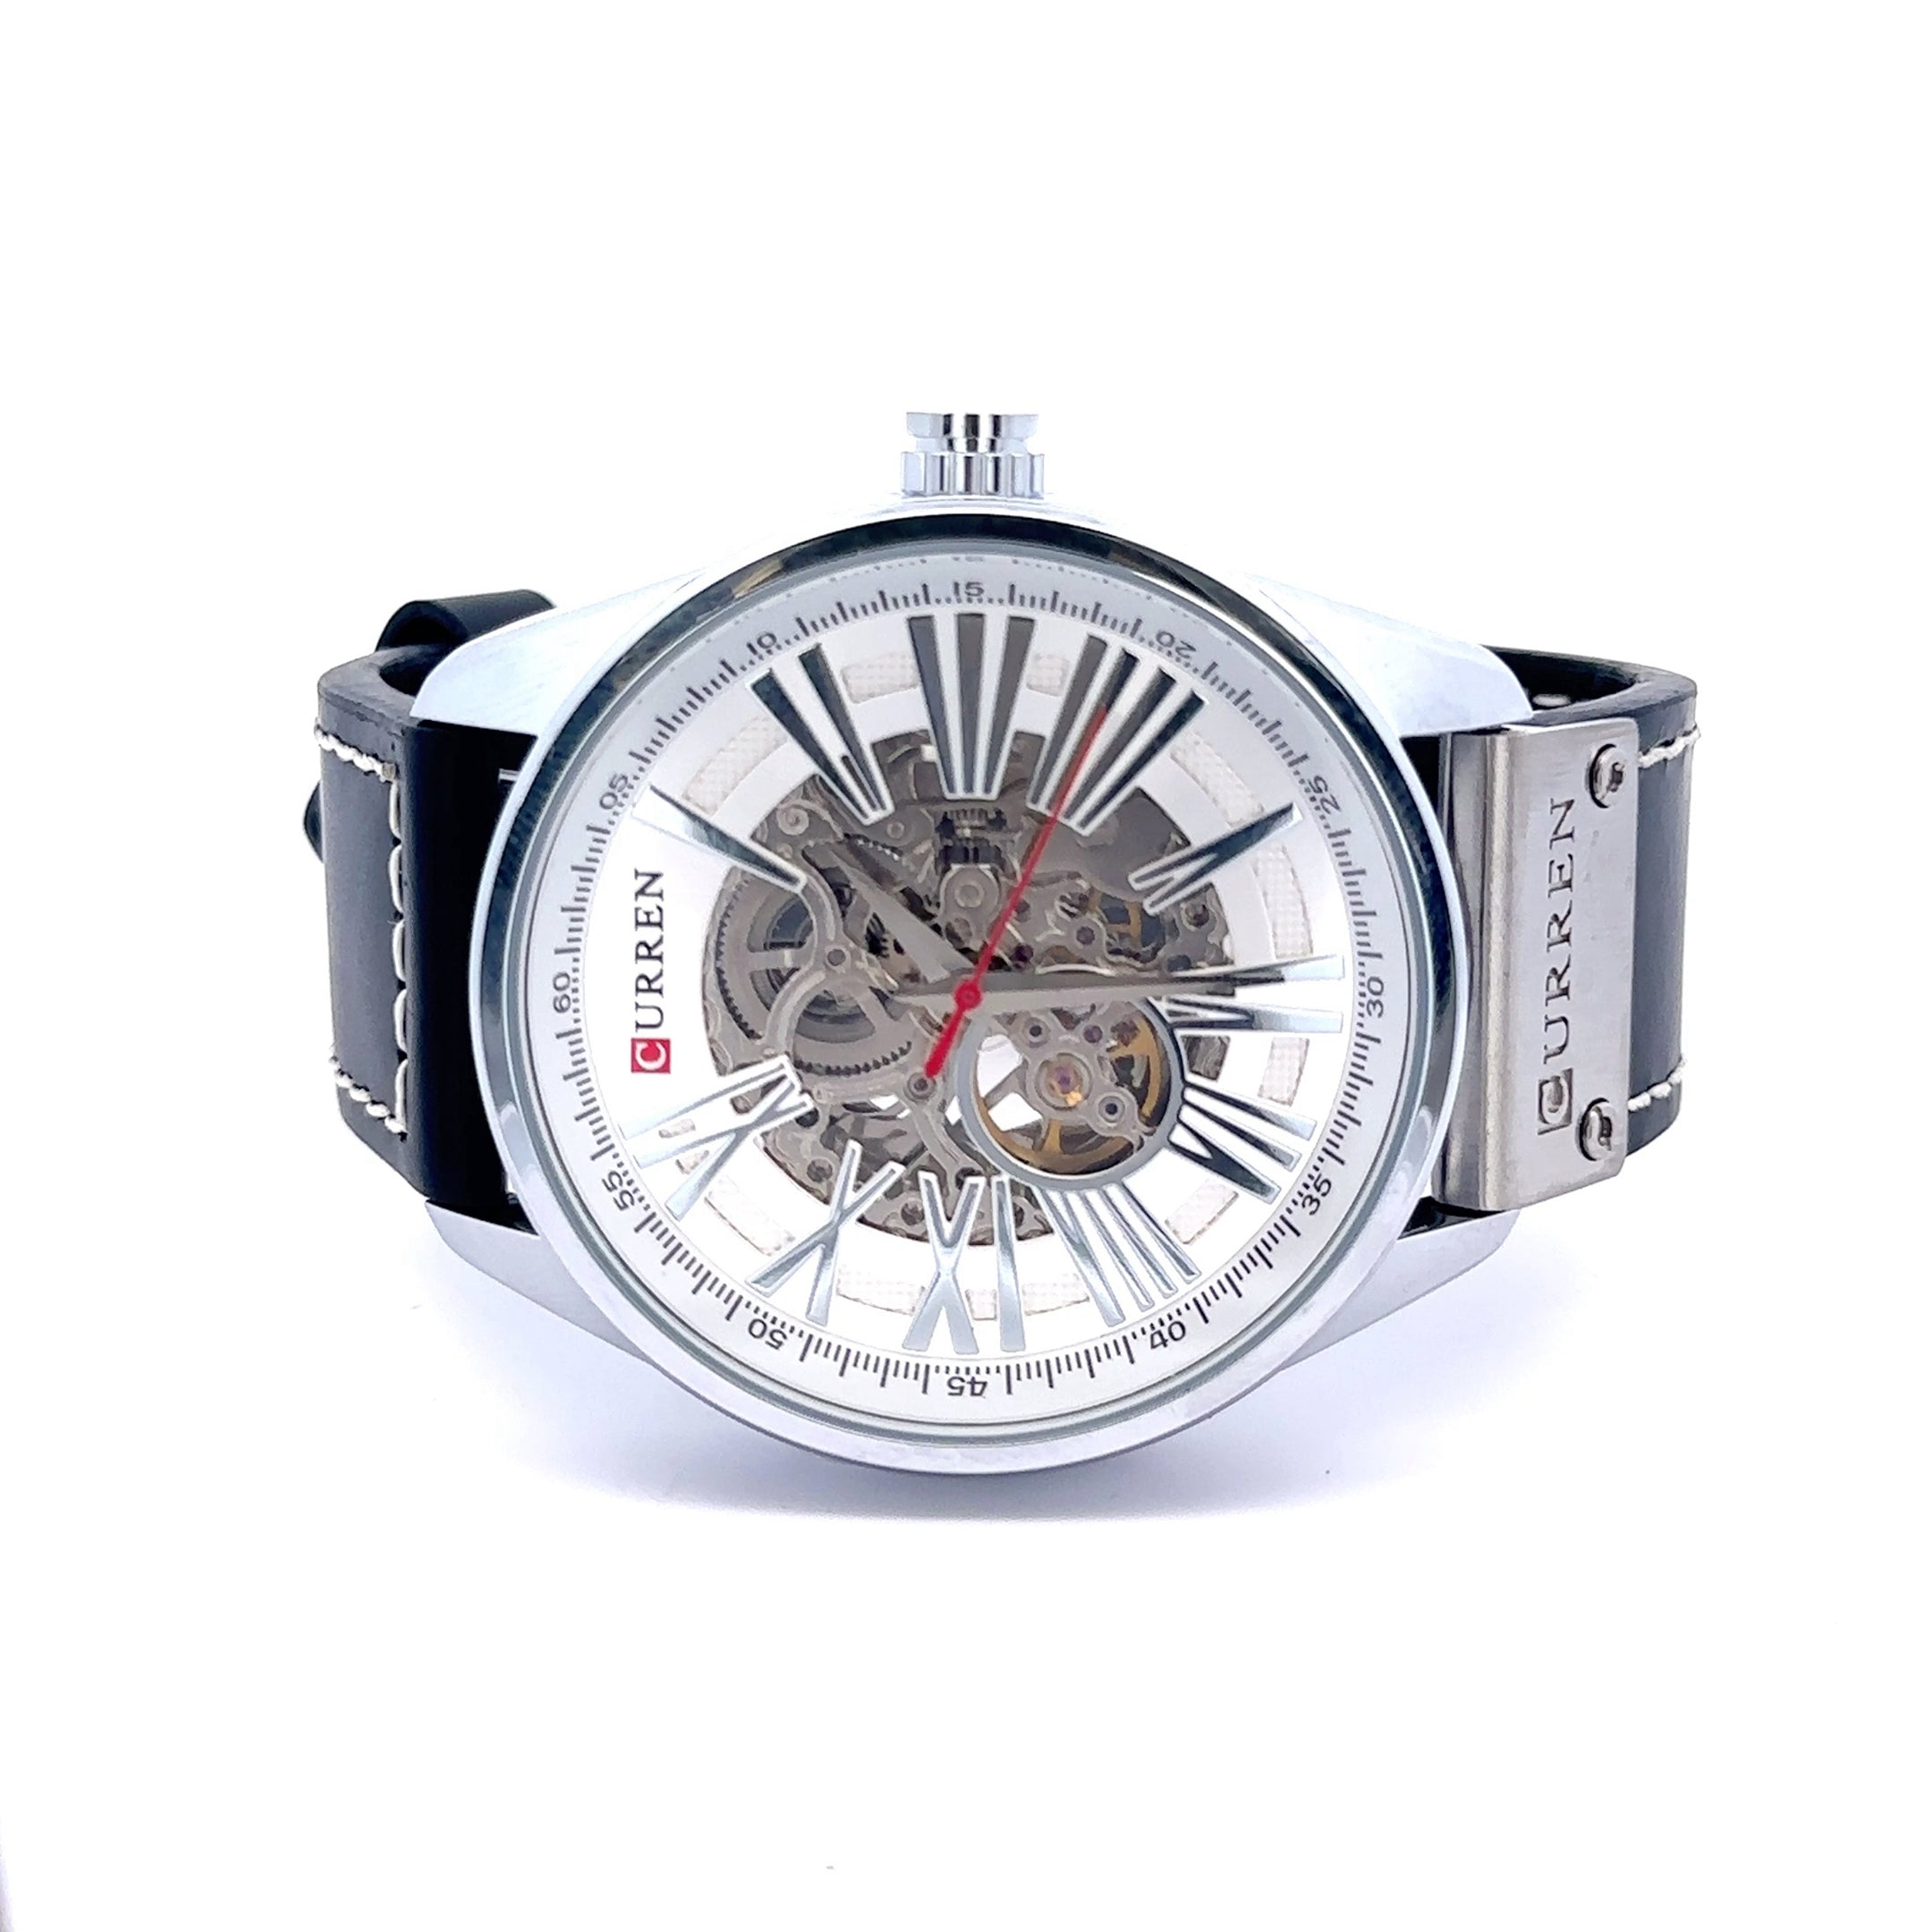 NOVATOR CURREN RHODIUM LEATHER ICED OUT WATCH I 541651